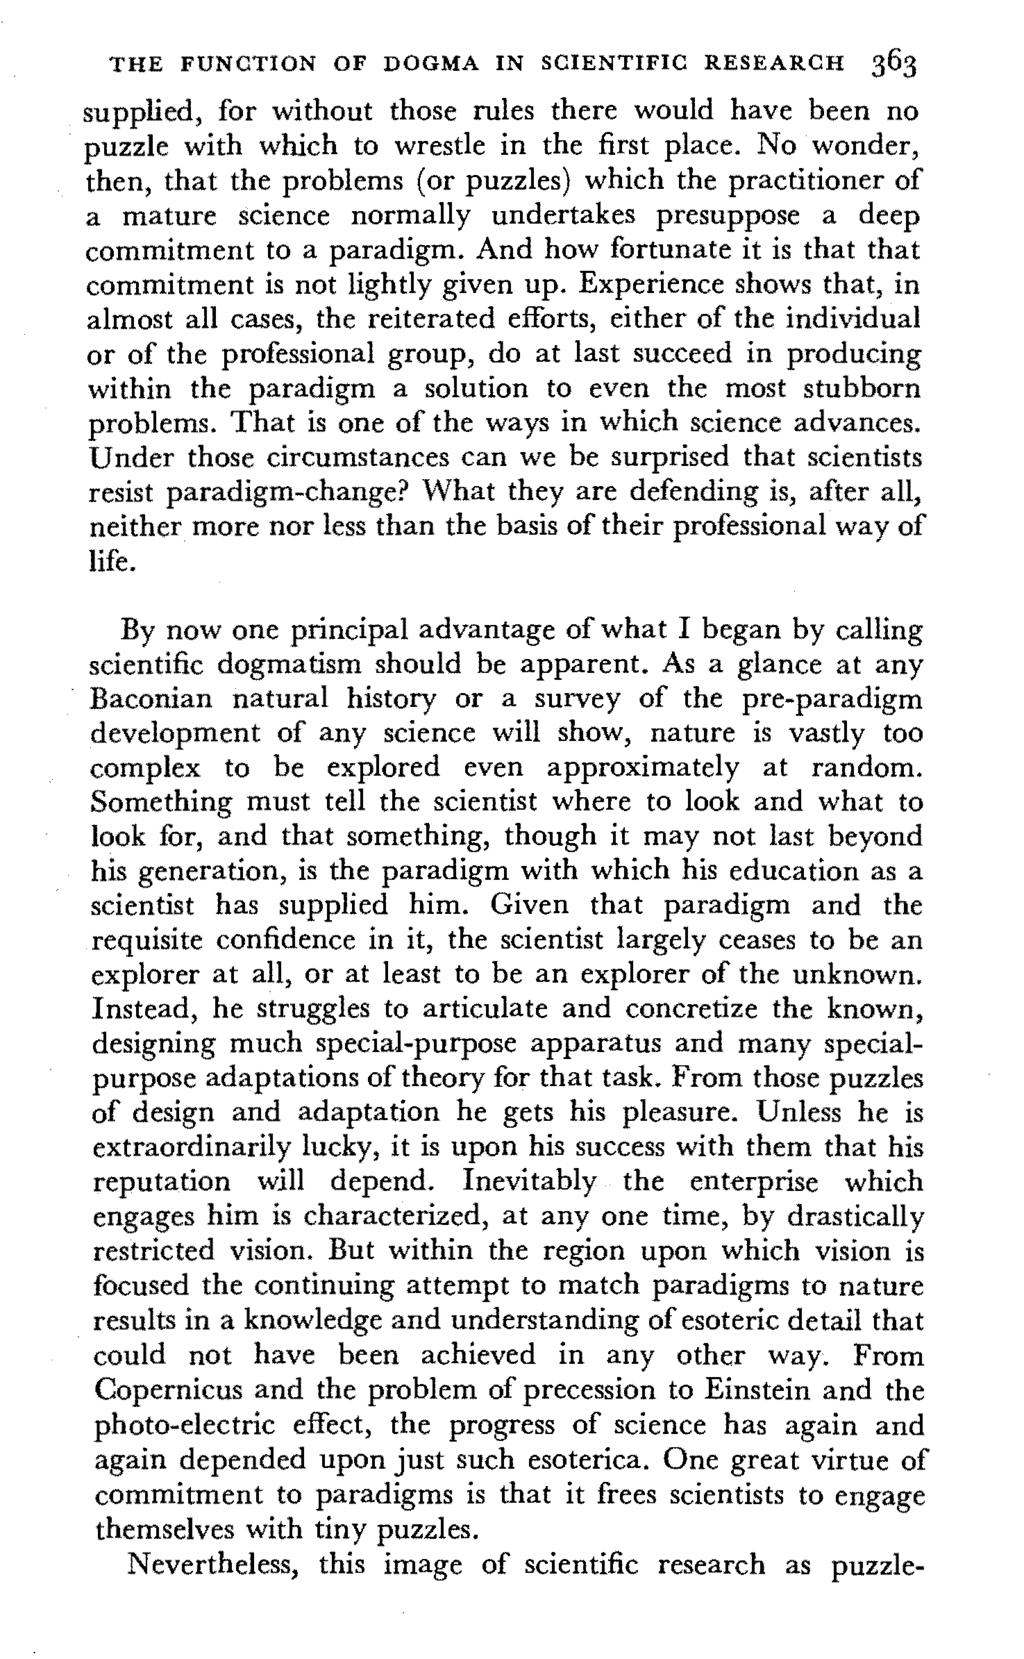 THE FUNCTION OF DOGMA IN SCIENTIFIC RESEARCH 363 supplied, for without those rules there would have been no puzzle with which to wrestle in the first place.